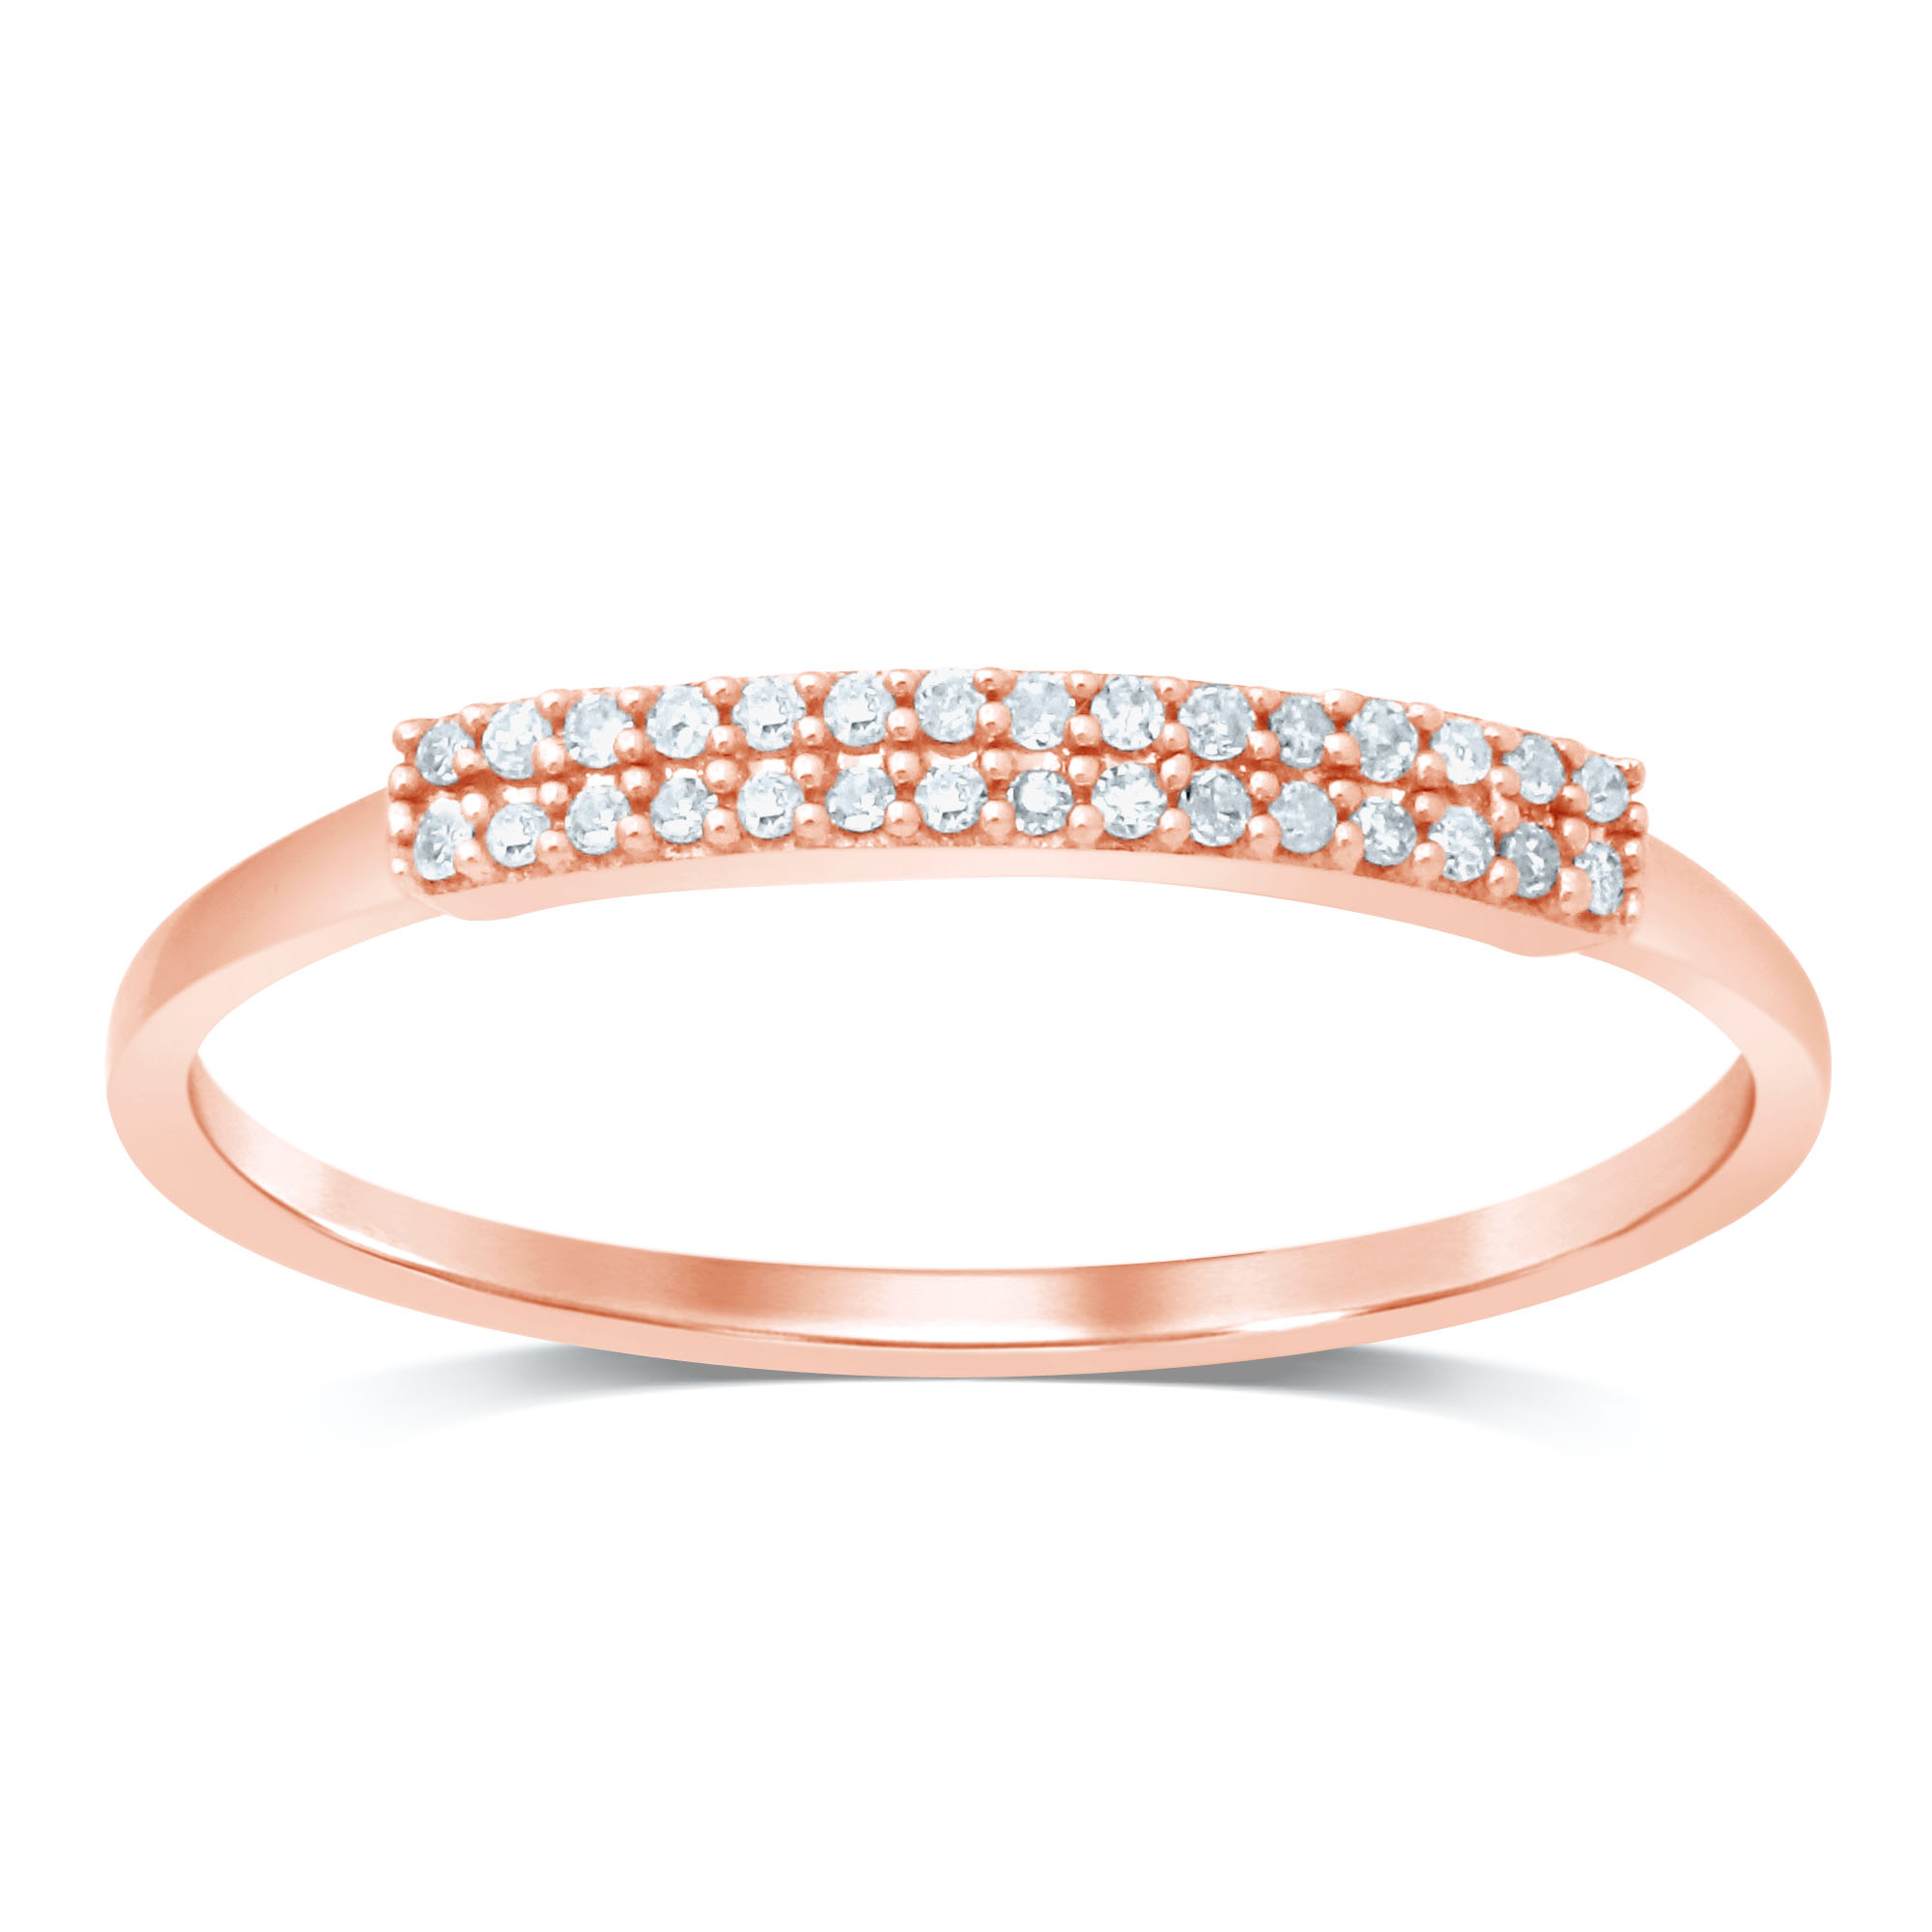 9ct Rose Gold Eternity Ring with 30 Diamonds